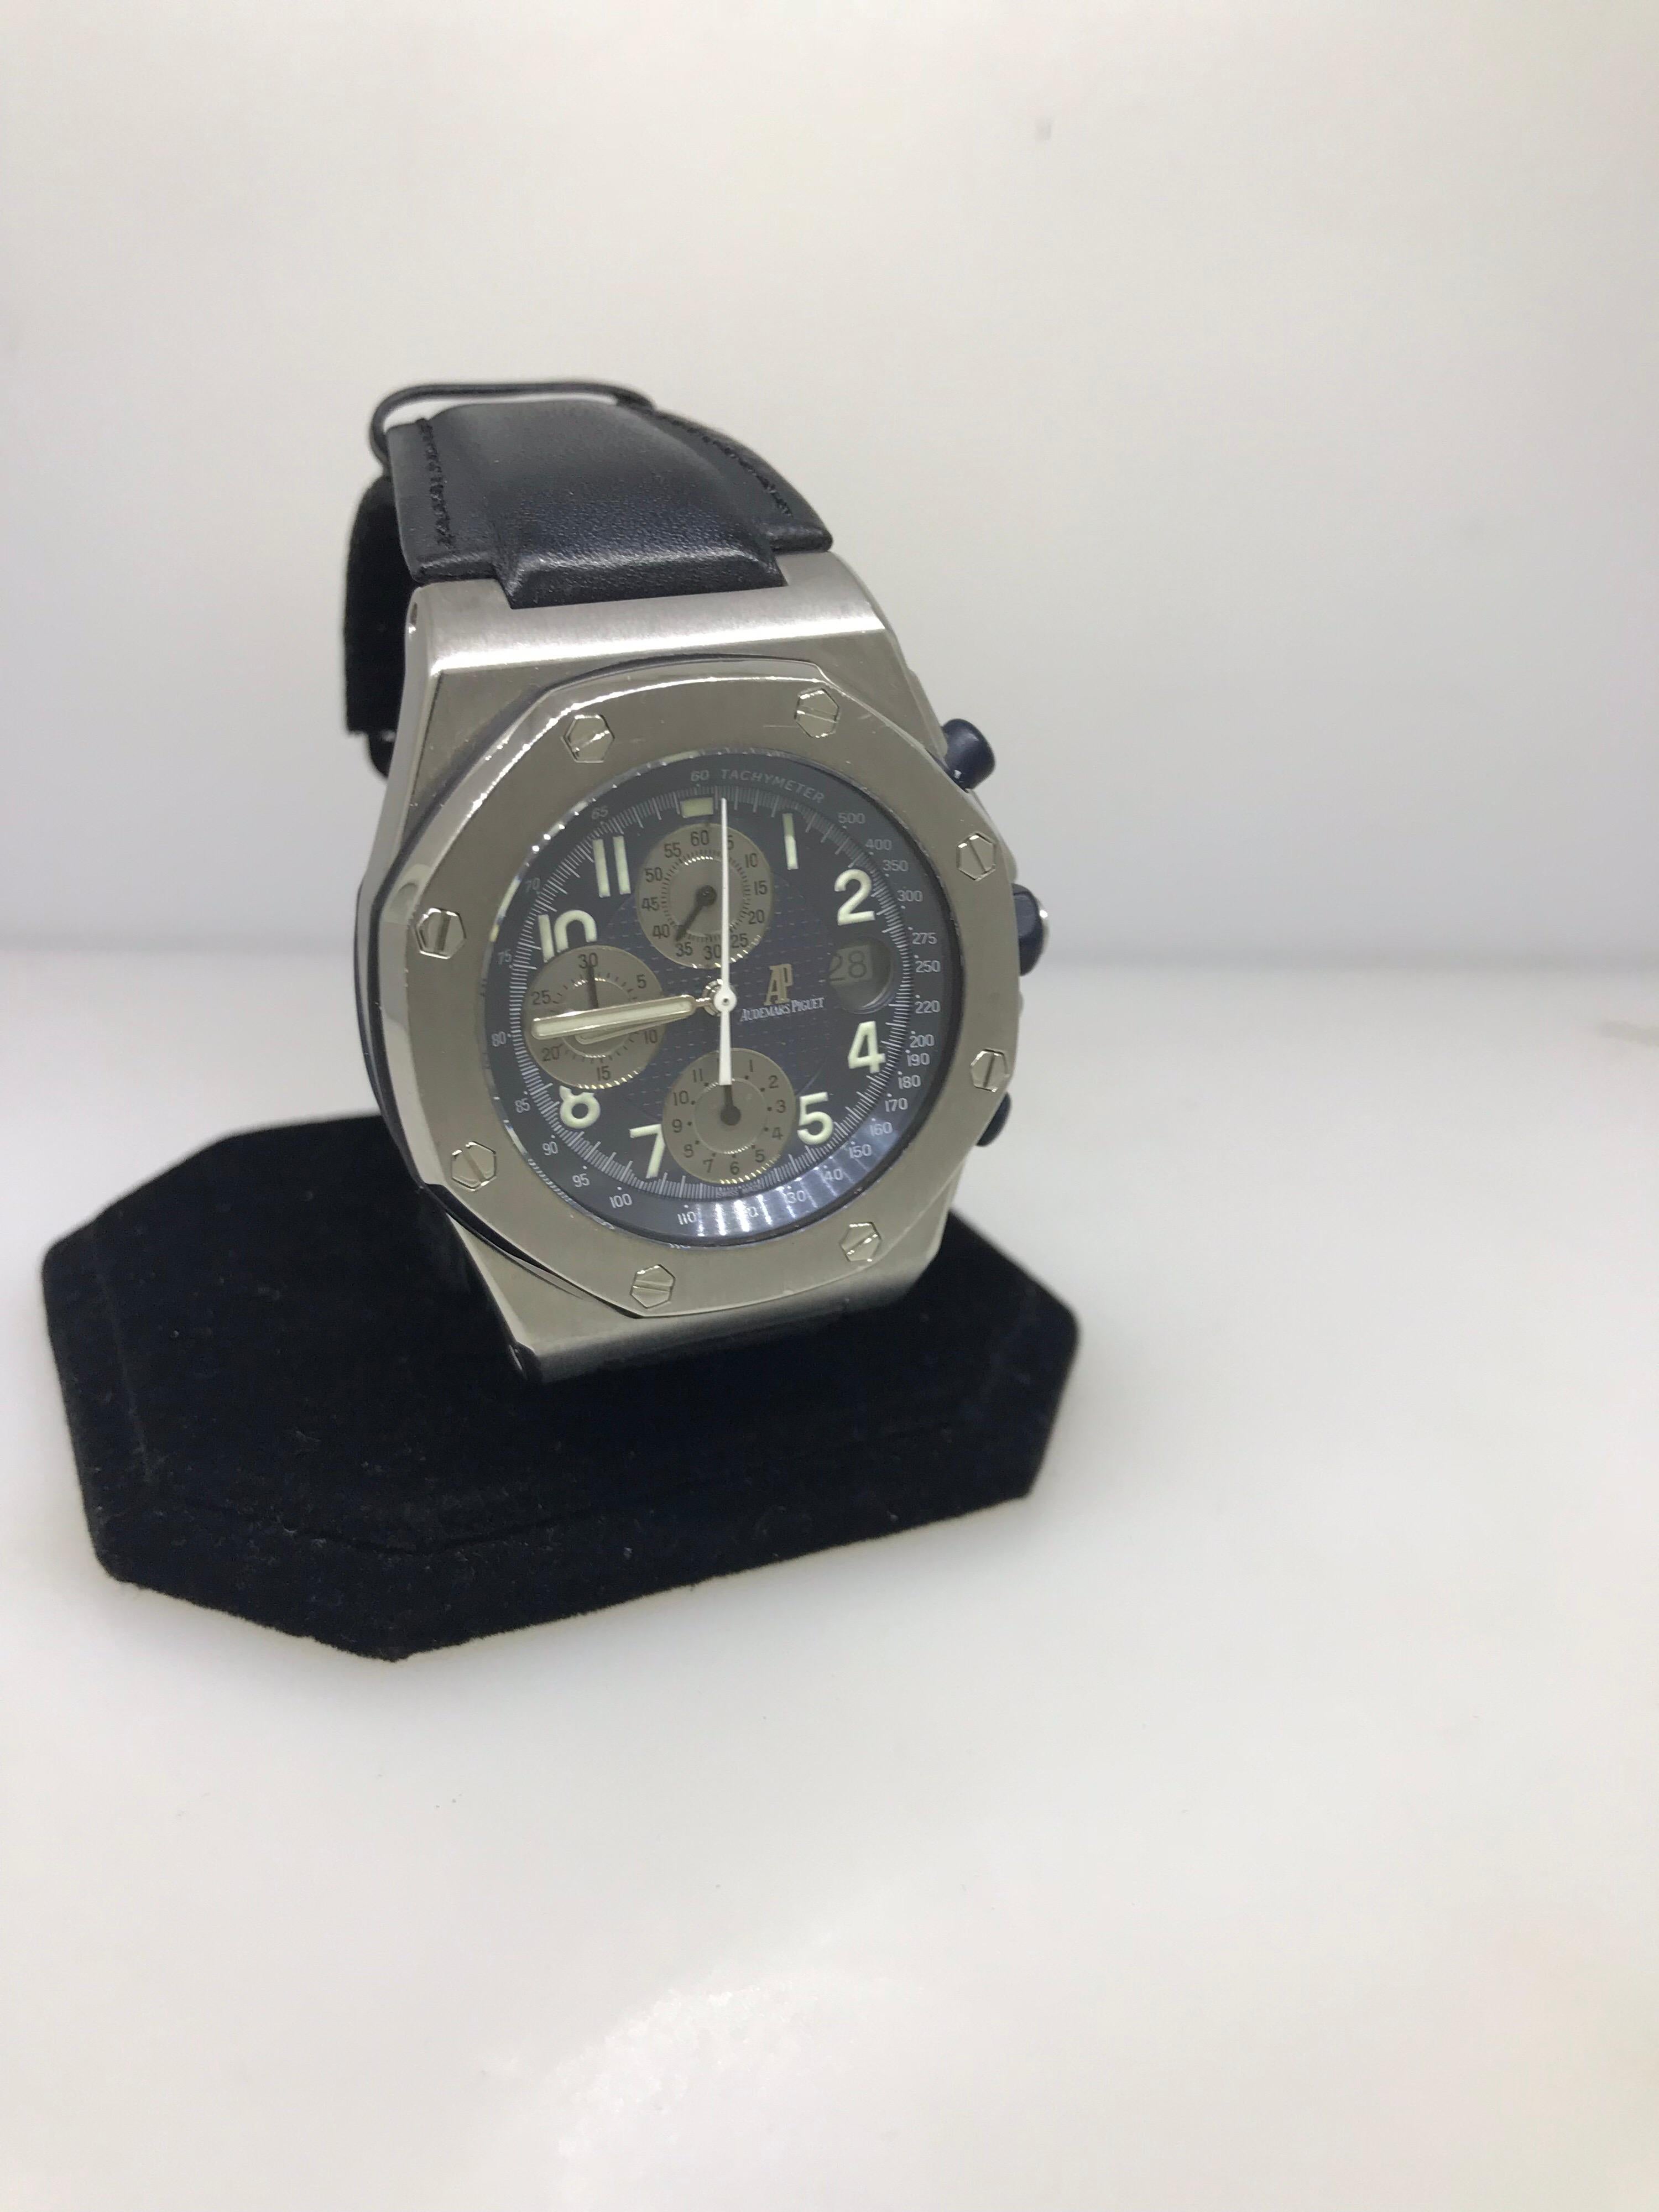 Audemars Piguet Royal Oak Offshore Chronograph Men's Watch 25721ST.OO.1000ST.05 In Good Condition For Sale In New York, NY